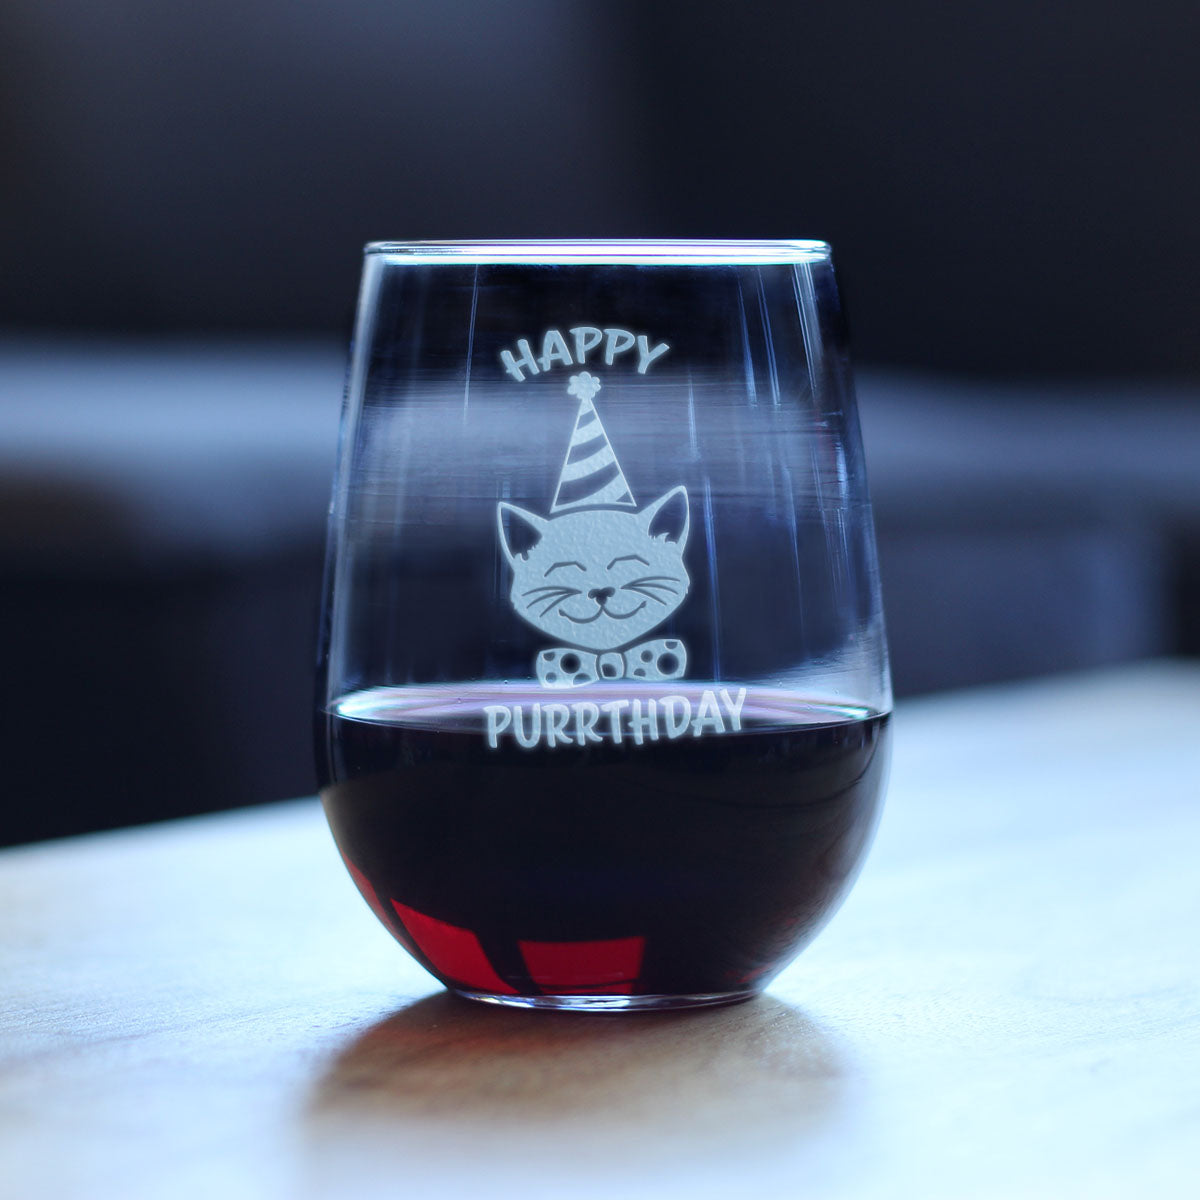 Happy Purrthday - Funny Cat Stemless Wine Glass for Birthday - Cute Cat Themed Bday Party Gifts and Decor - Large 17 Oz